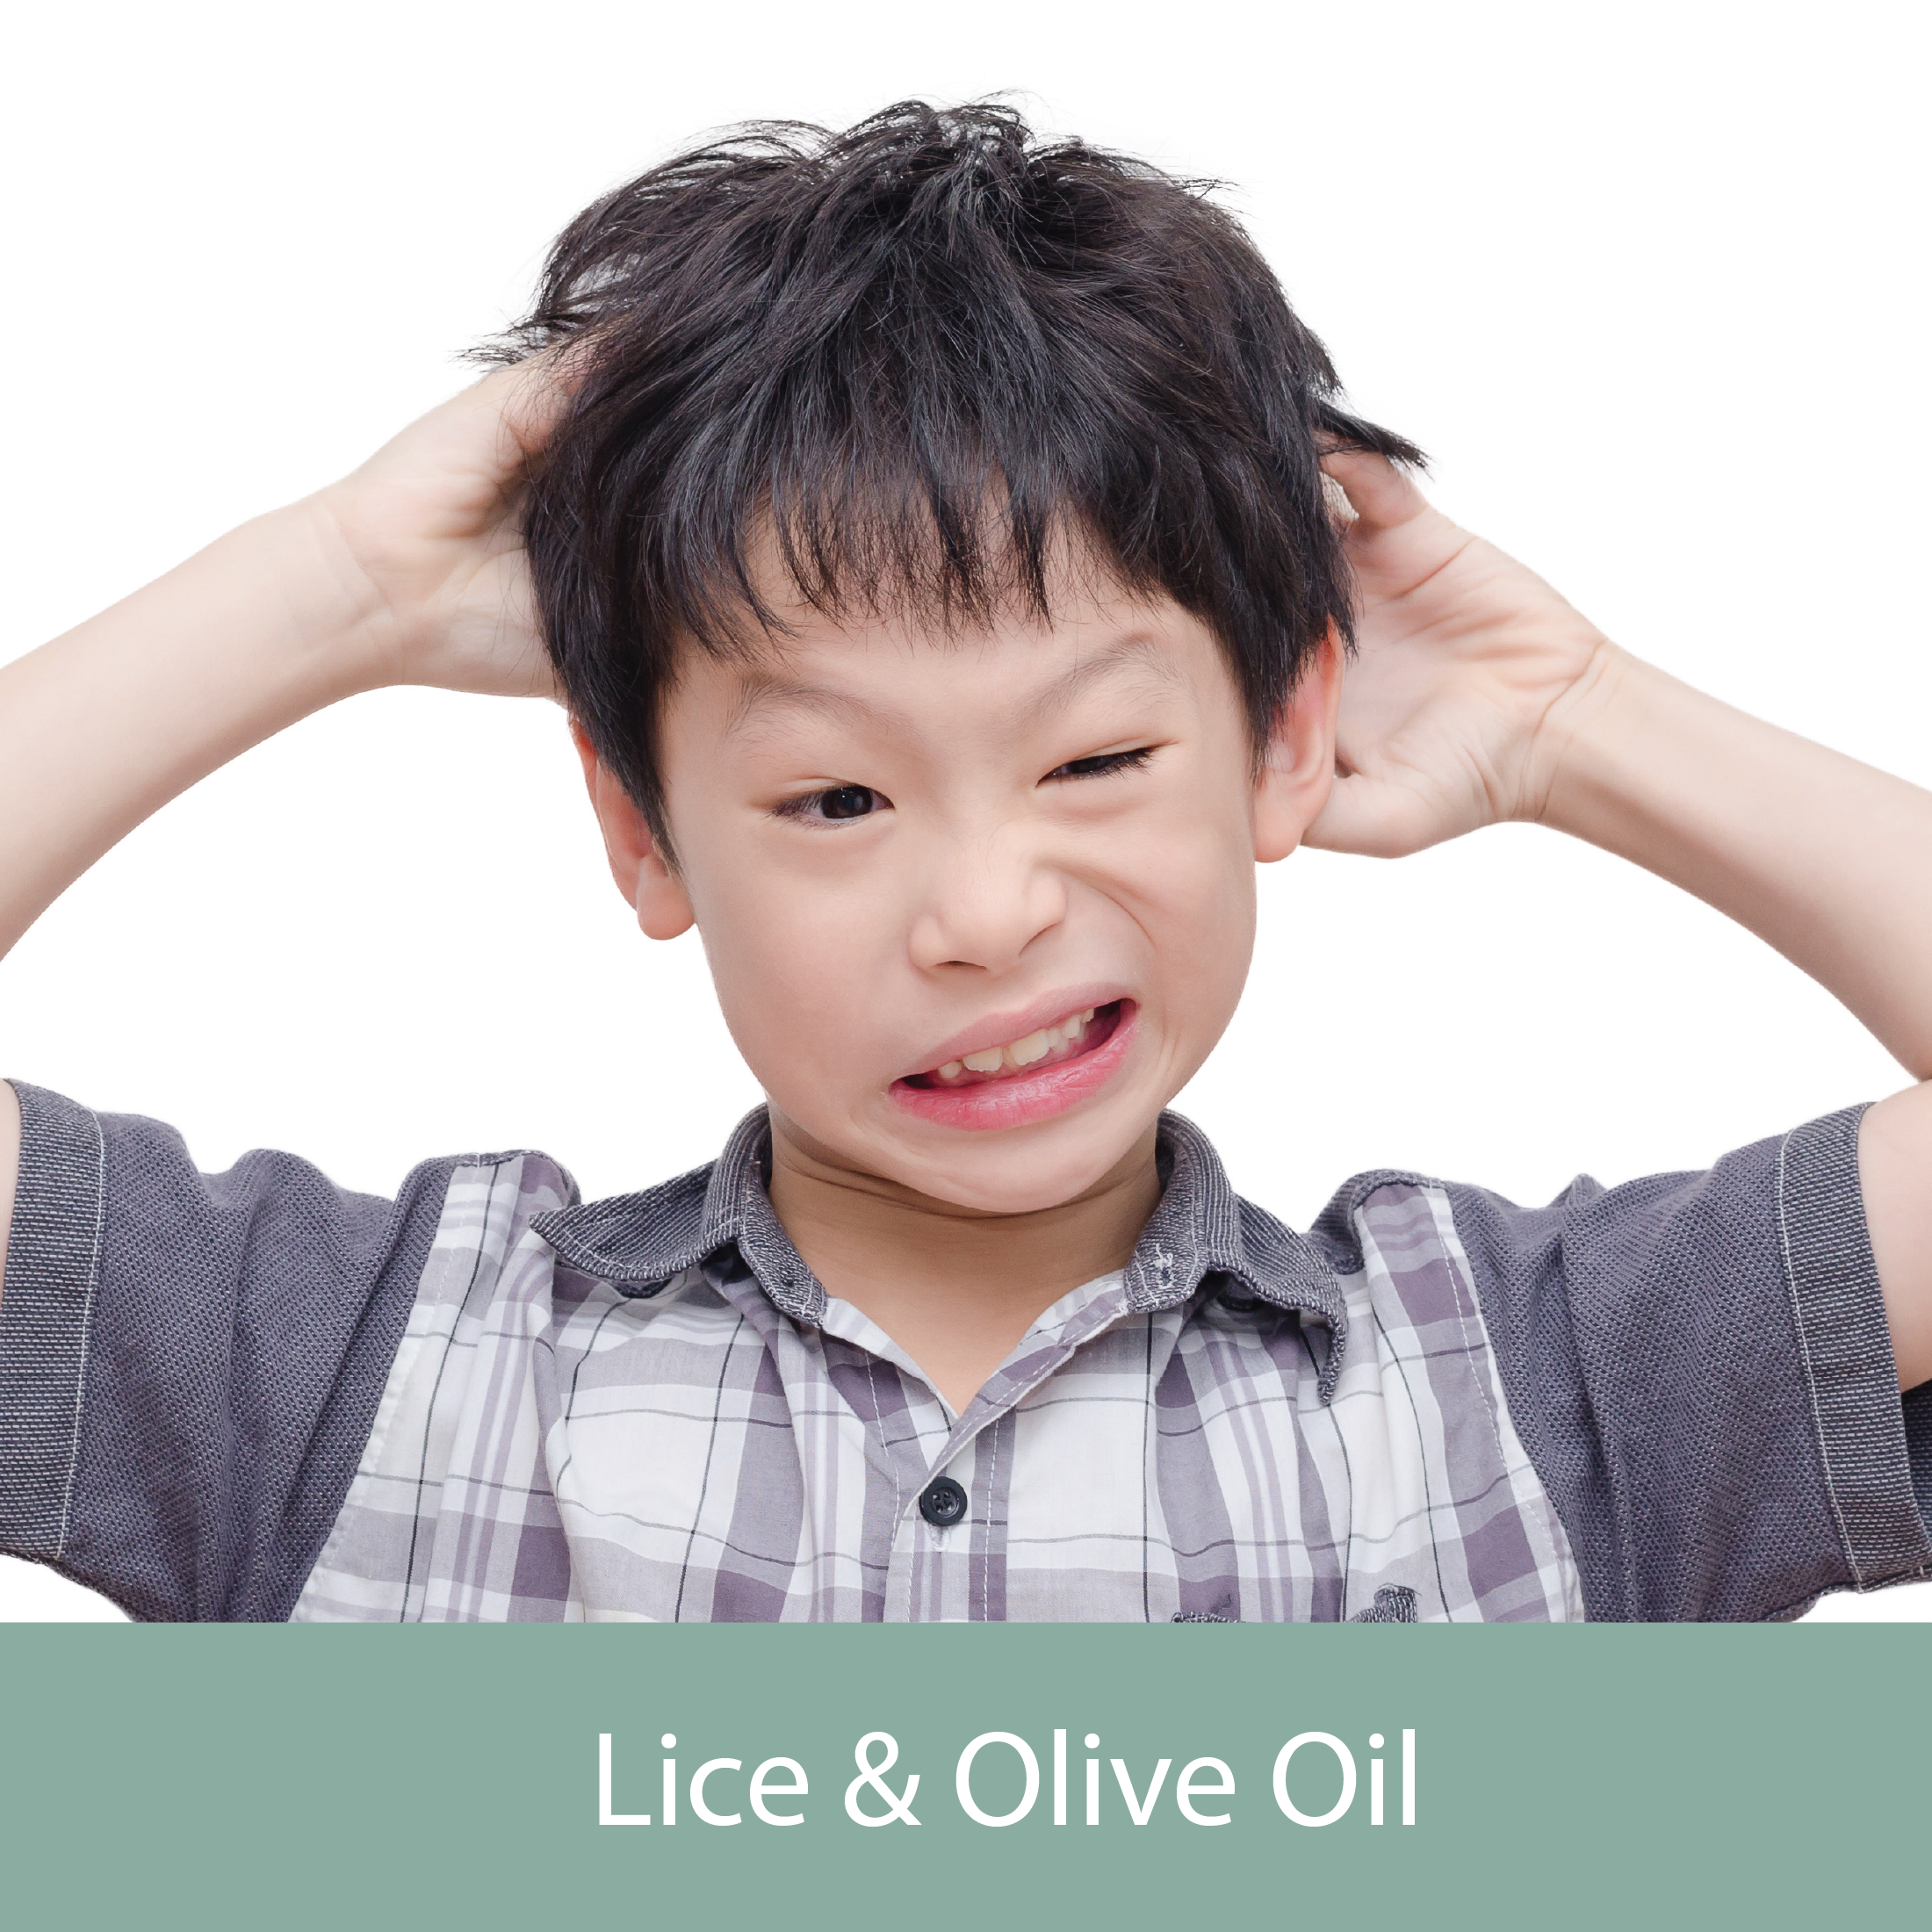 Lice and Olive Oil